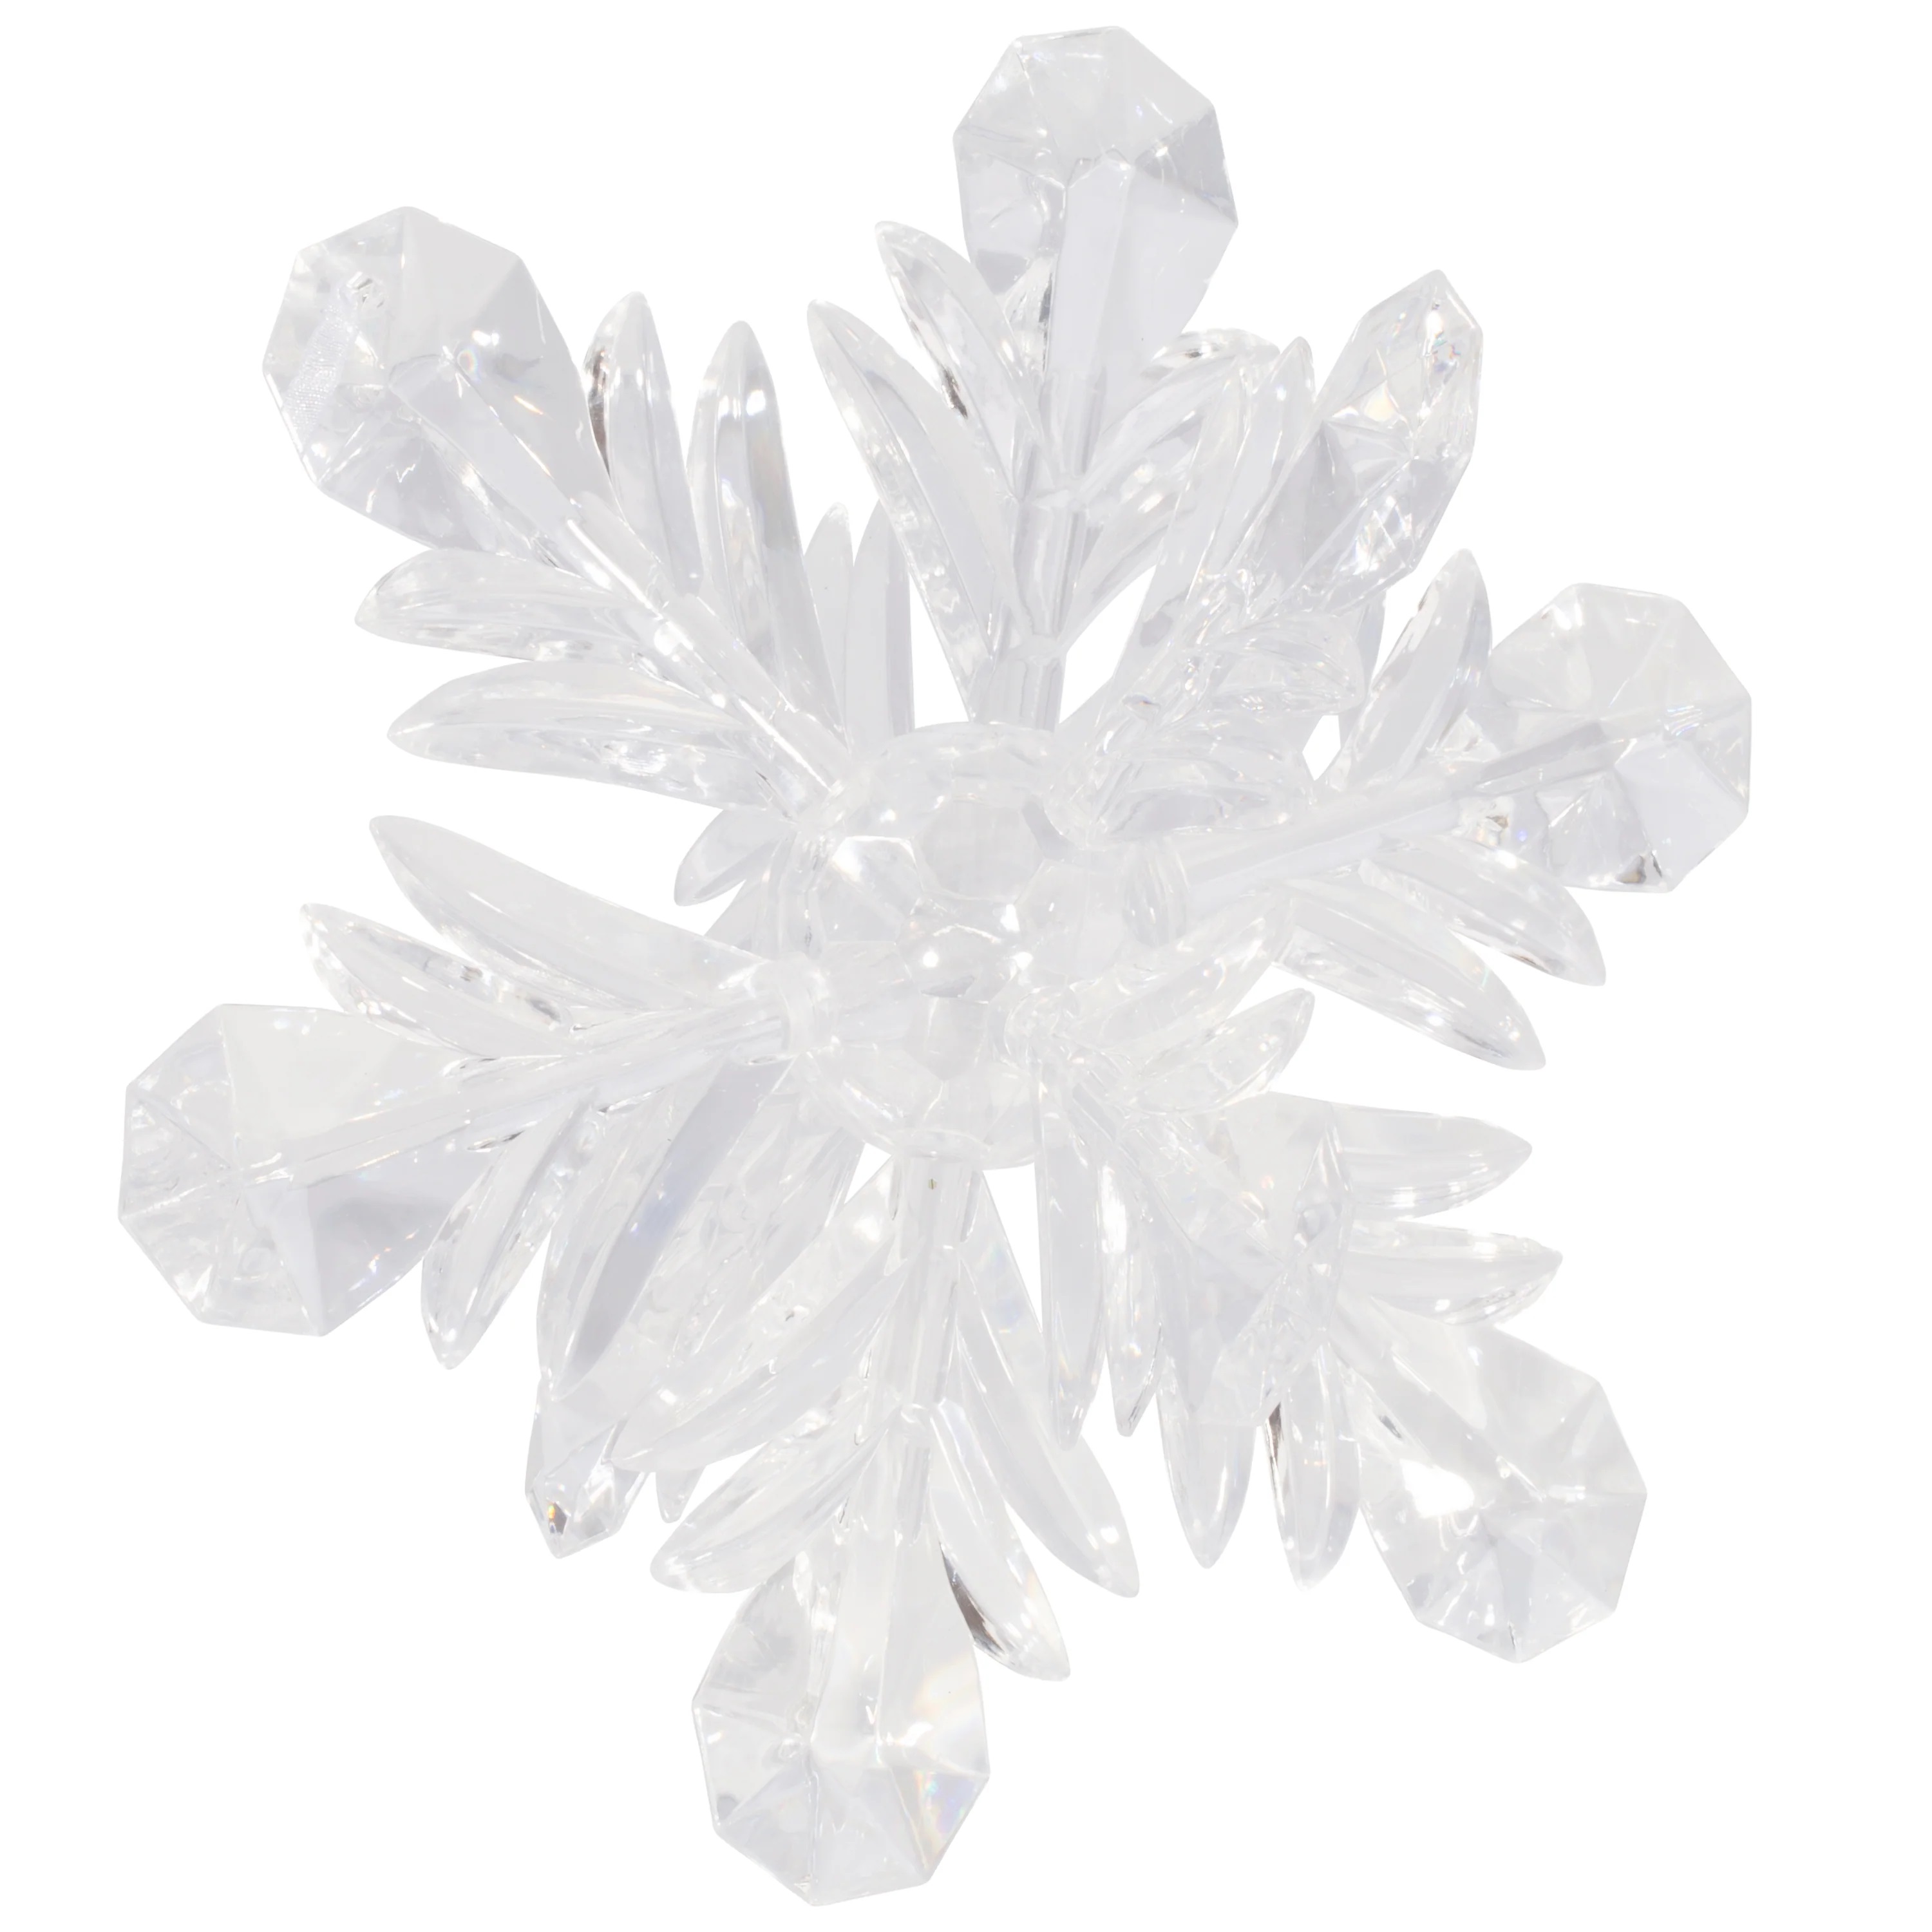 52 x Large Clear 3D Snowflake Hanging Ornament